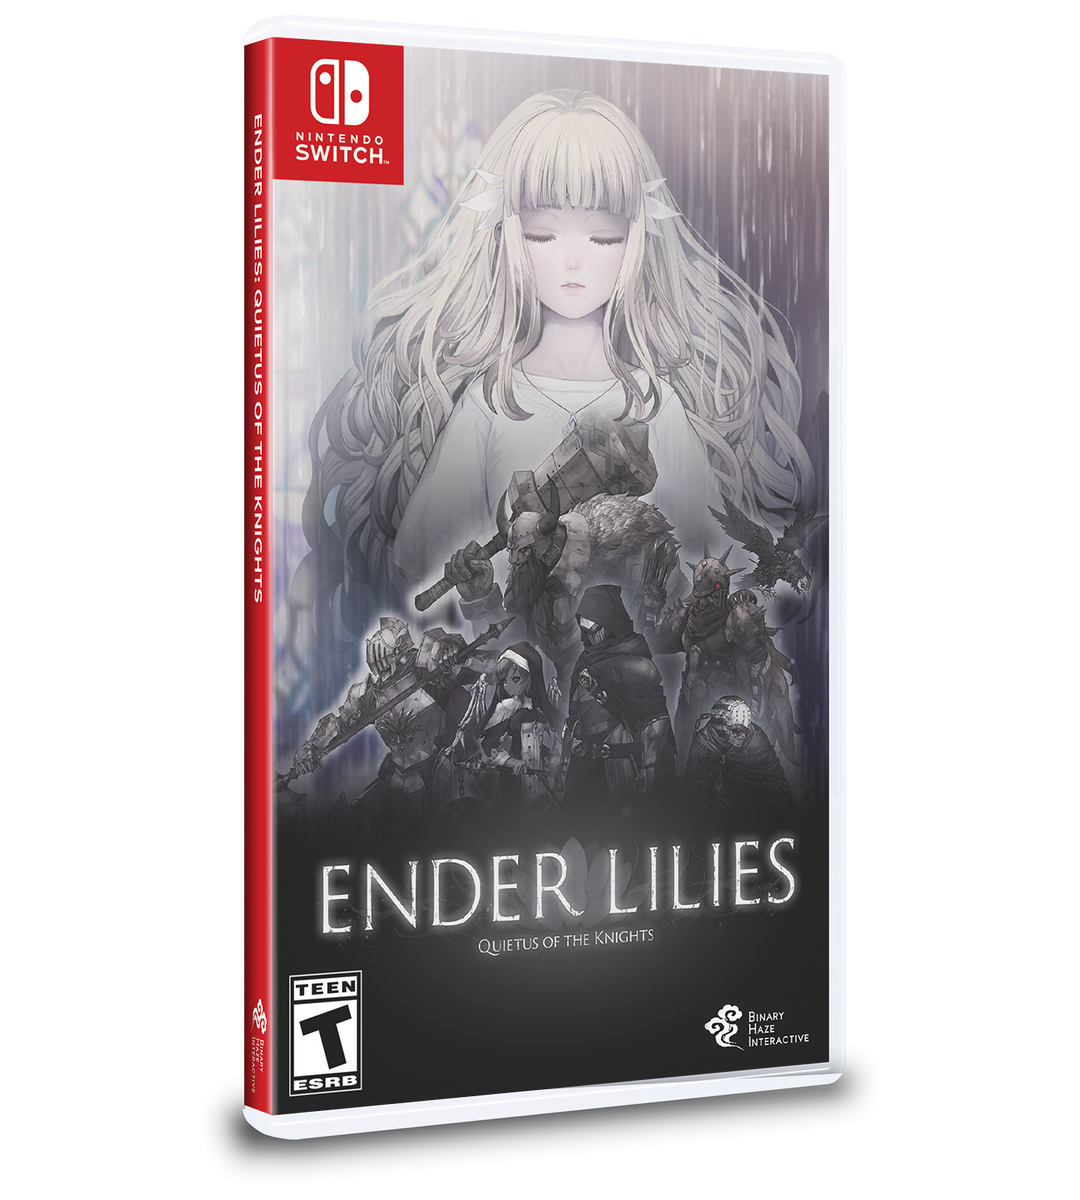 ENDER LILIES: Quietus of the Knights (Switch)